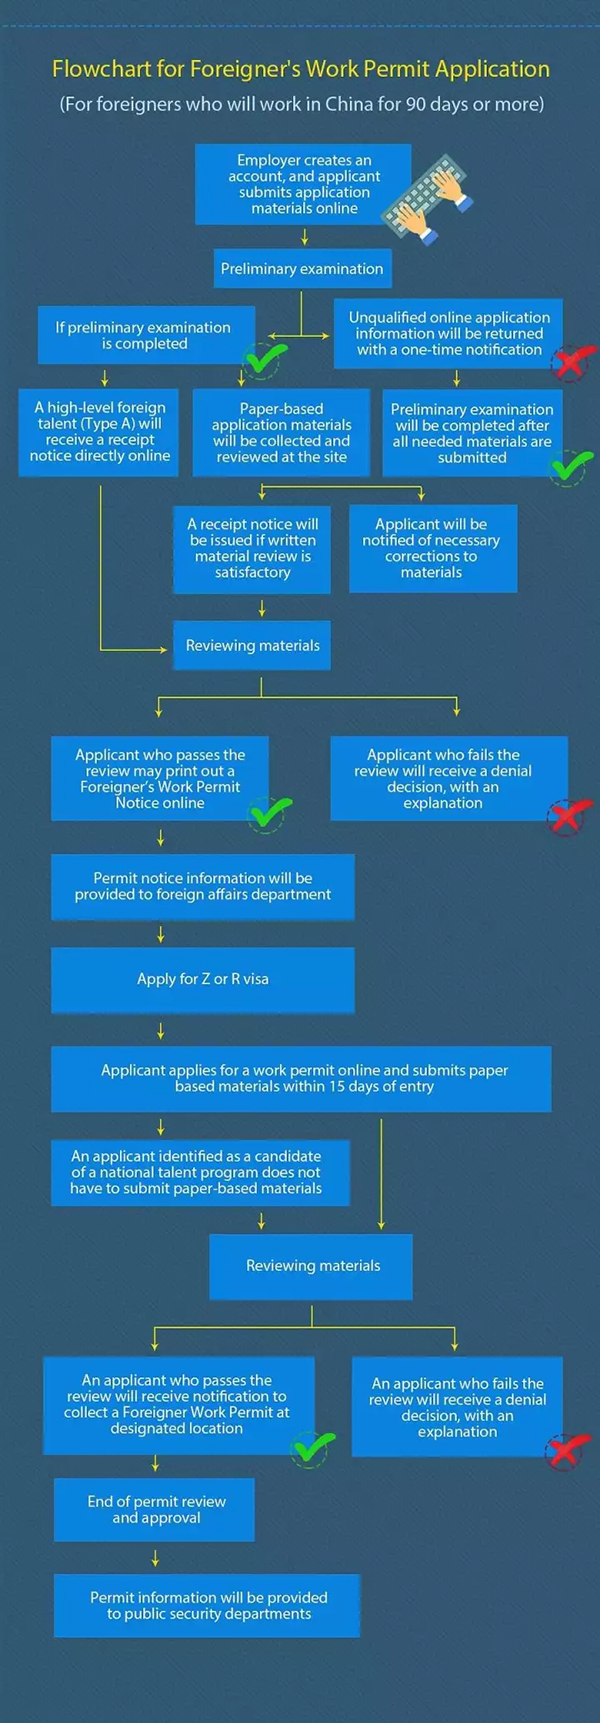 Flowchart for Foreigner's Work Permit Application